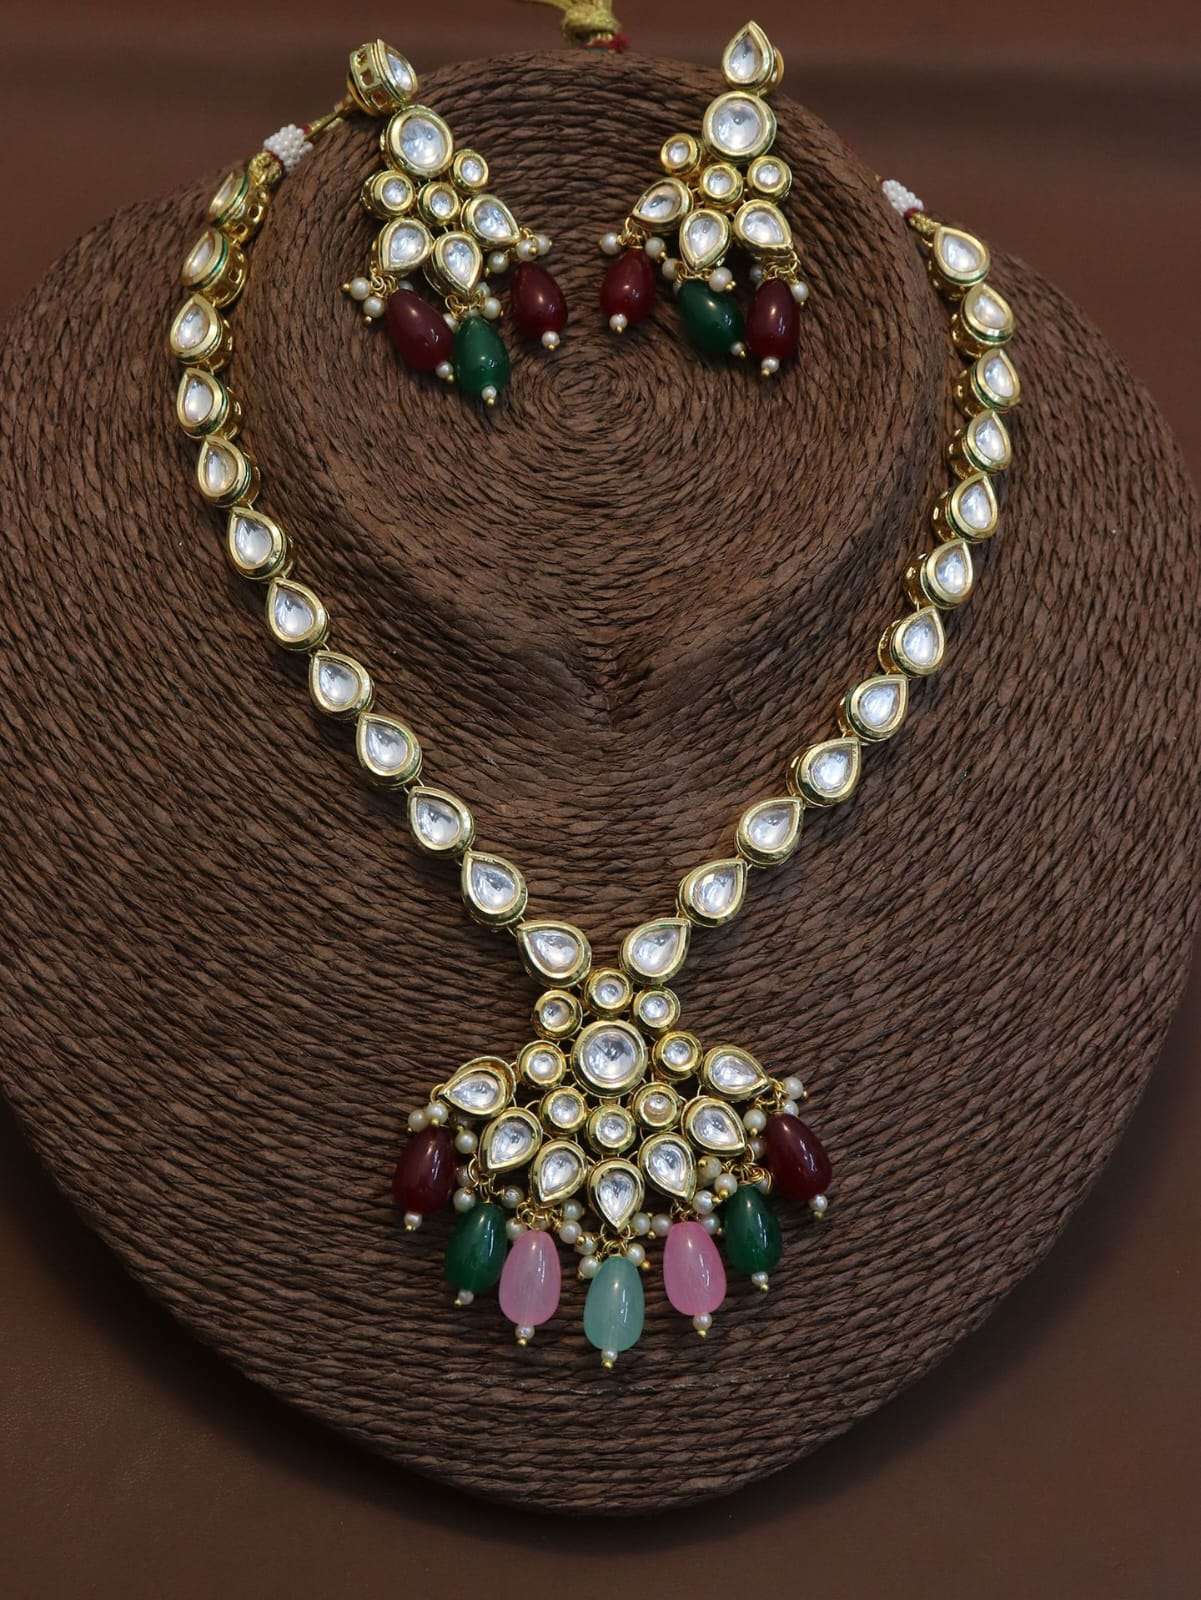 S-696 BY FASHID WHOLESALE 01 TO 07 SERIES TRADITIONAL ARTIFICIAL JEWELLERY FOR INDIAN ATTIRE AT EXCLUSIVE RANGE.